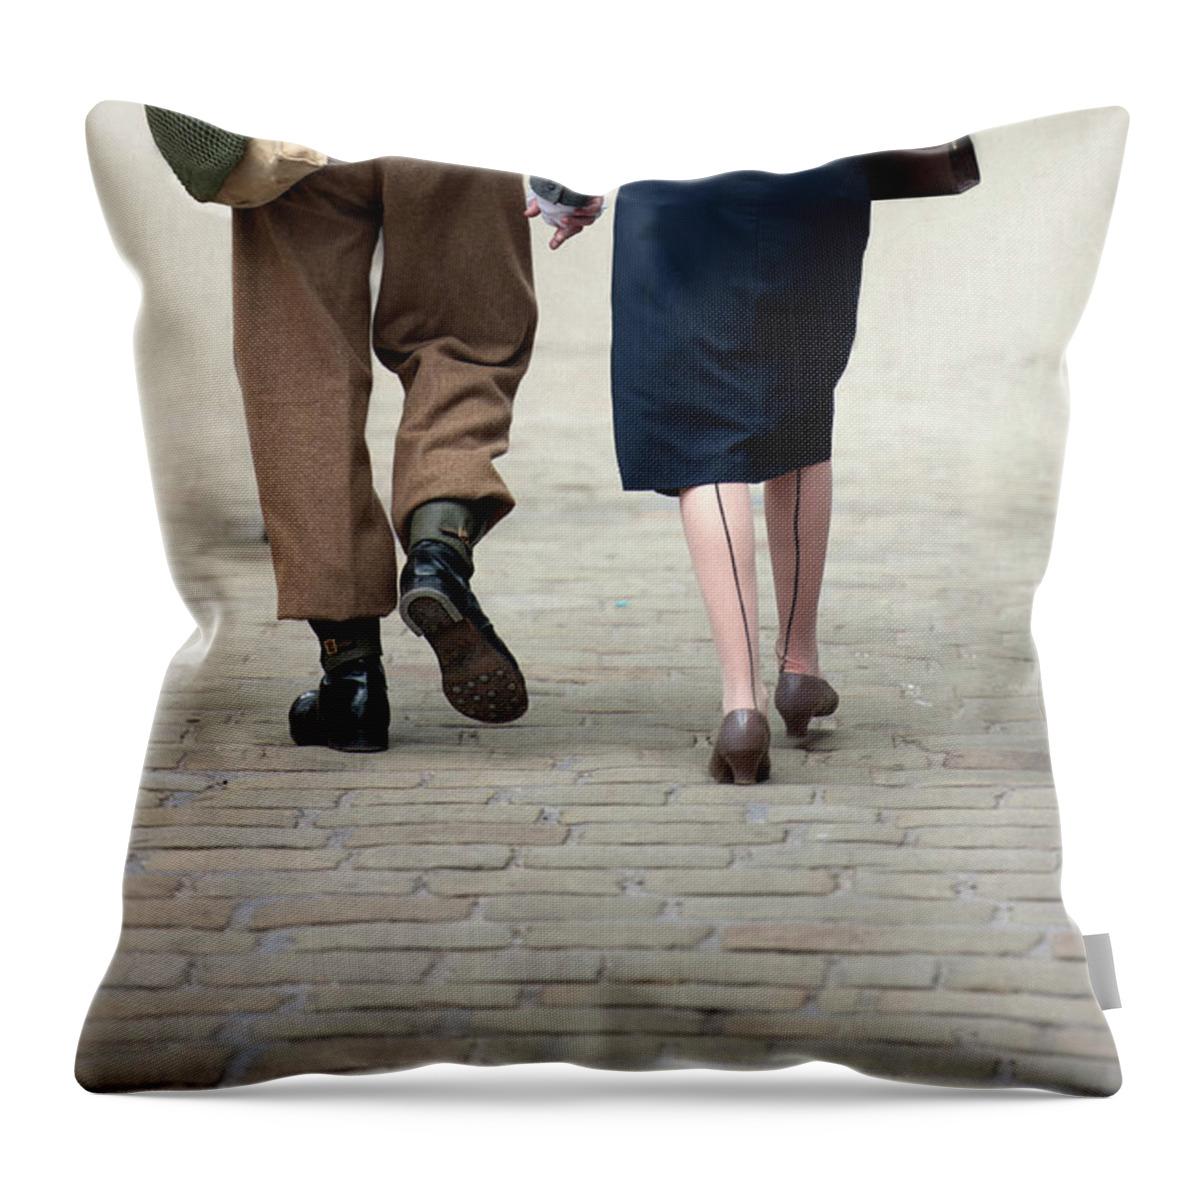 Woman Throw Pillow featuring the photograph 1940s Couple Soldier And Civilian Holding Hands by Lee Avison